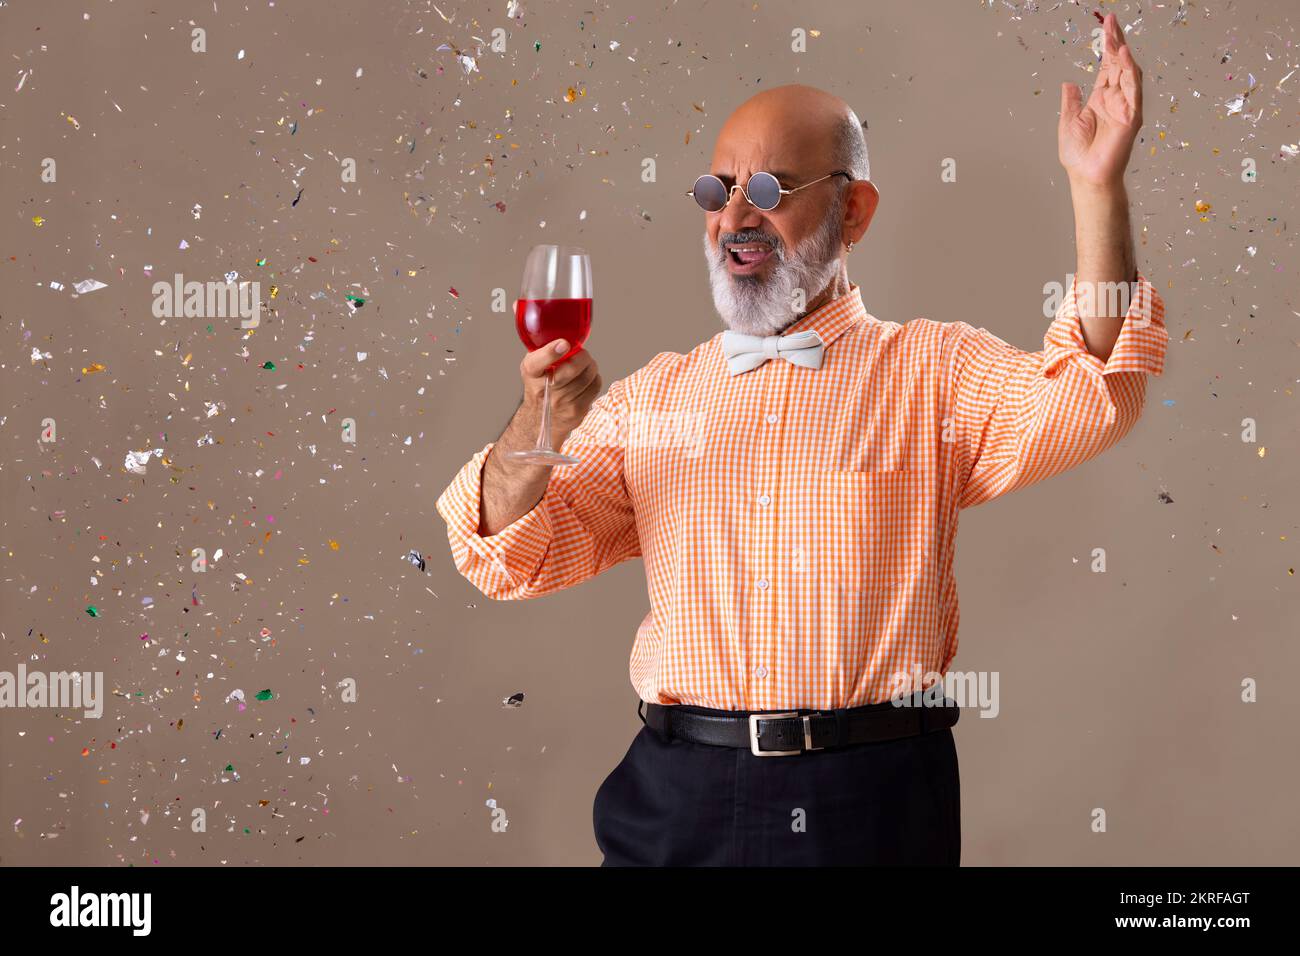 Senior man cheering with a glass of red wine Stock Photo